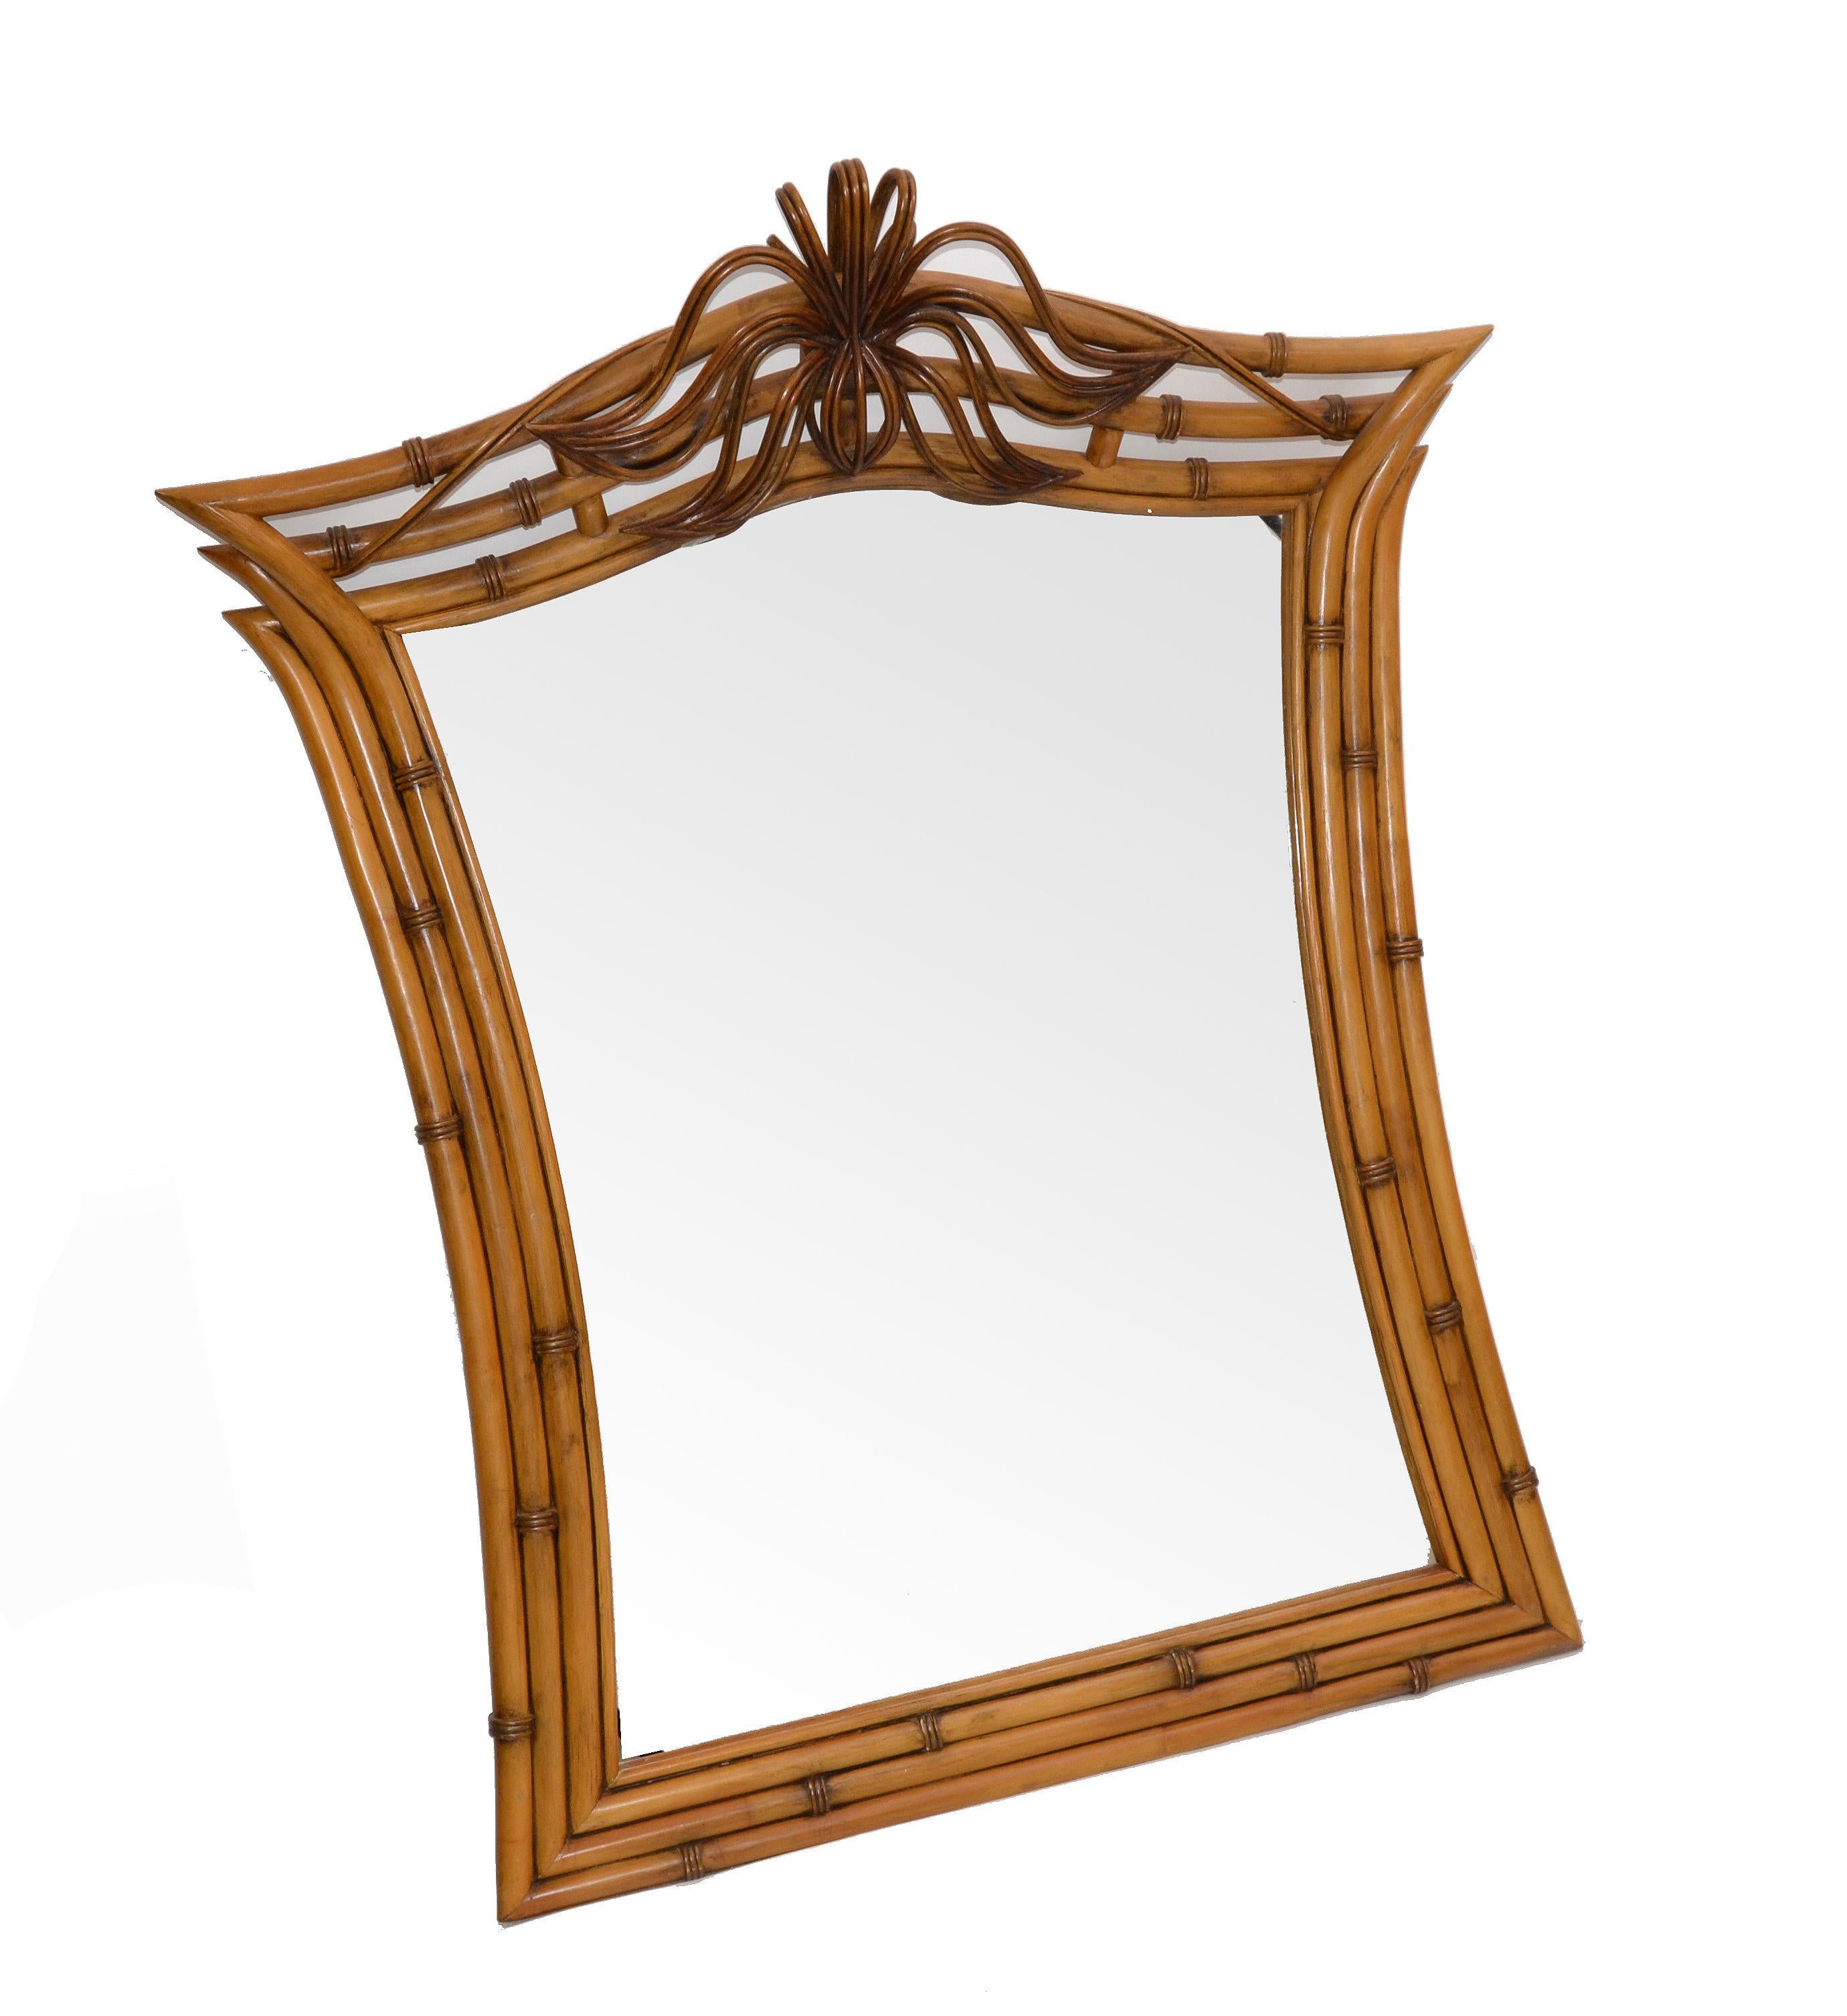 American Mid-Century Modern Framed Handcrafted Bamboo, Wood and Wicker Wall Mirror, 1960s For Sale